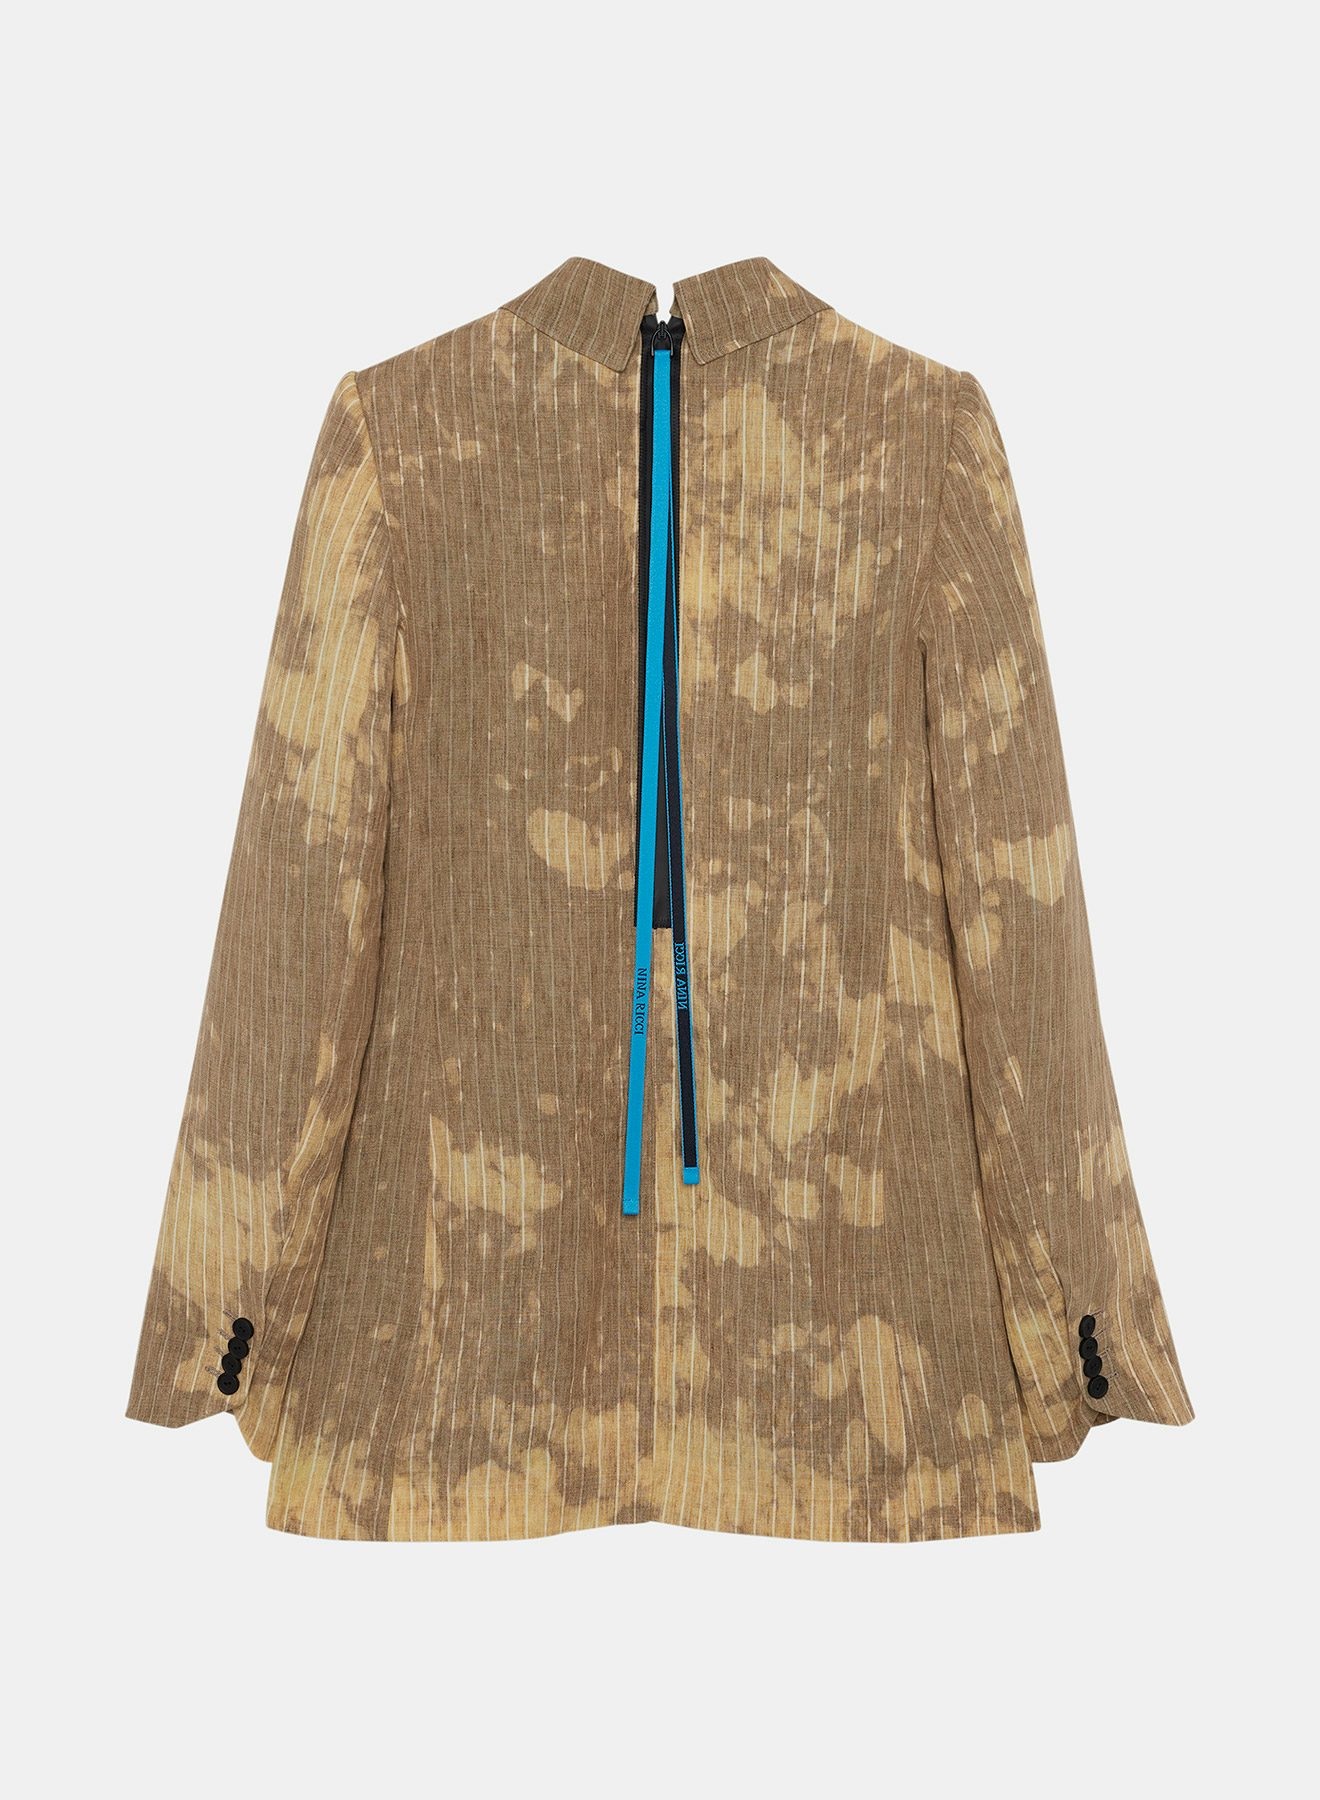 Tie and dye striped linen jacket with contrasting lining - Nina Ricci